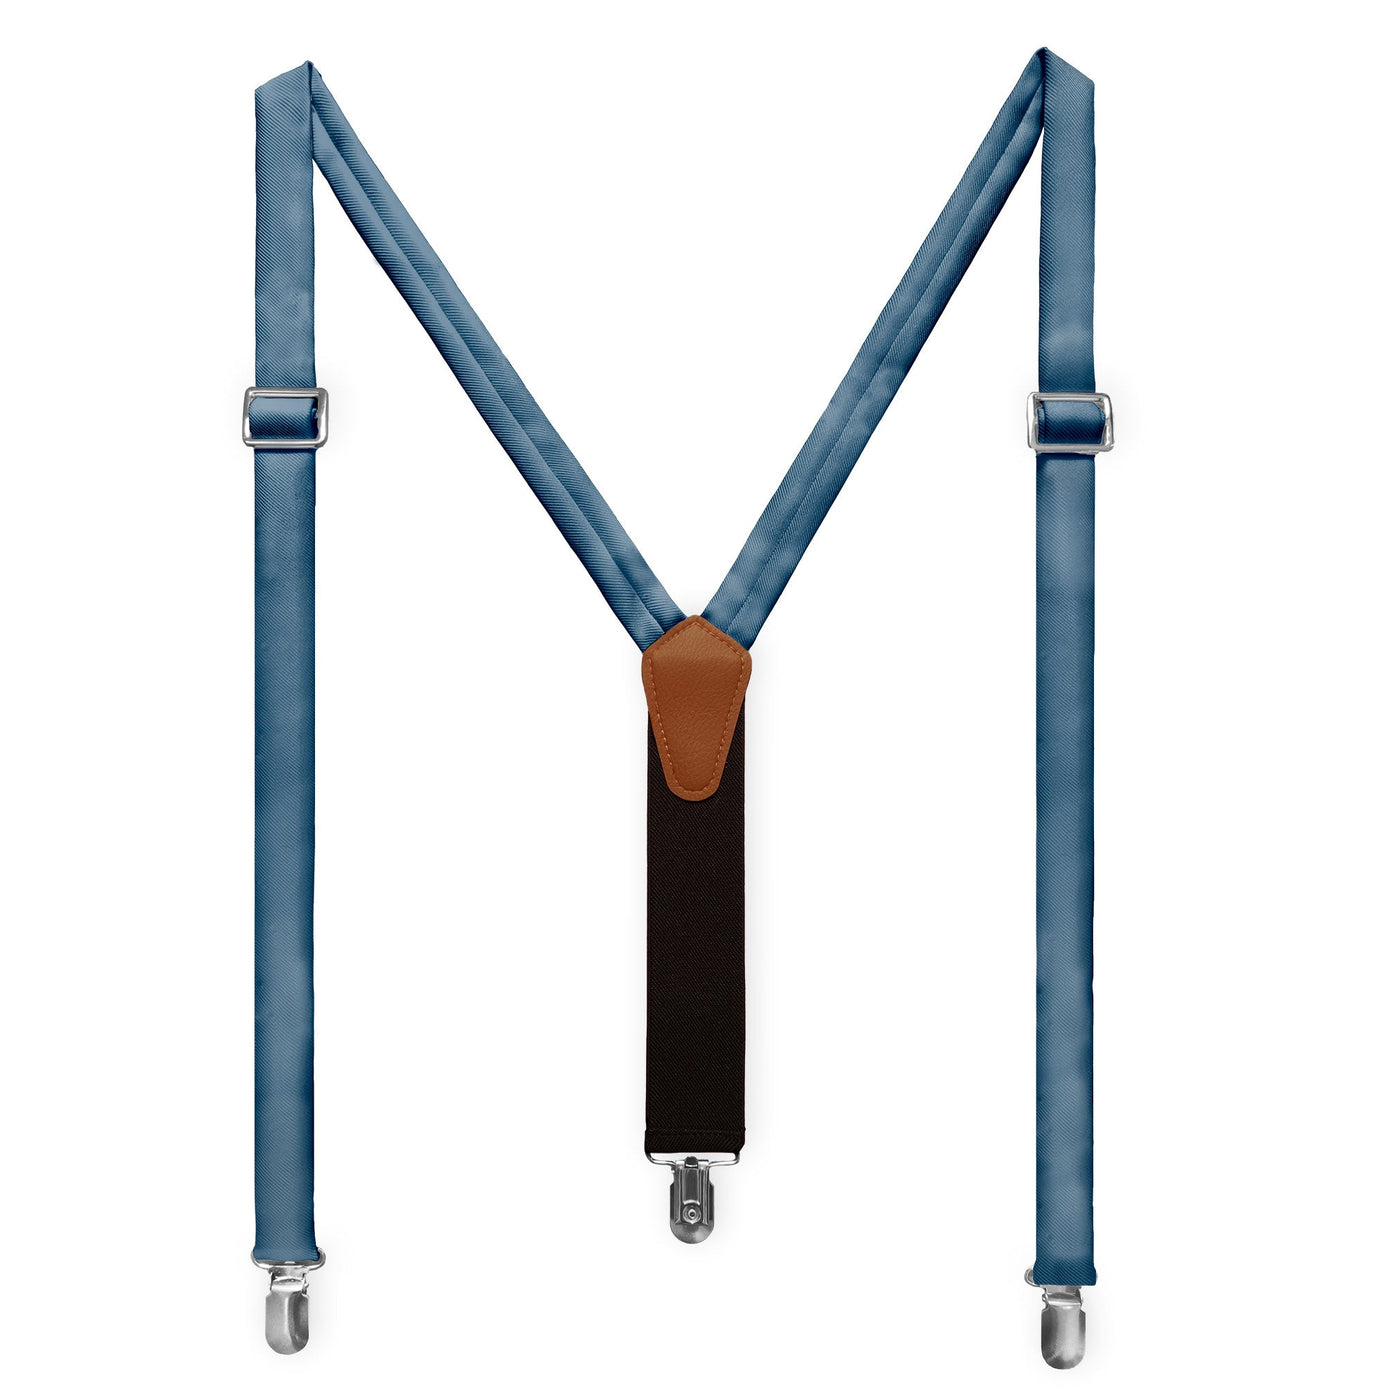 Wedding Suspenders: Perfect Patterns for the Wedding Party - Knotty Tie Co.